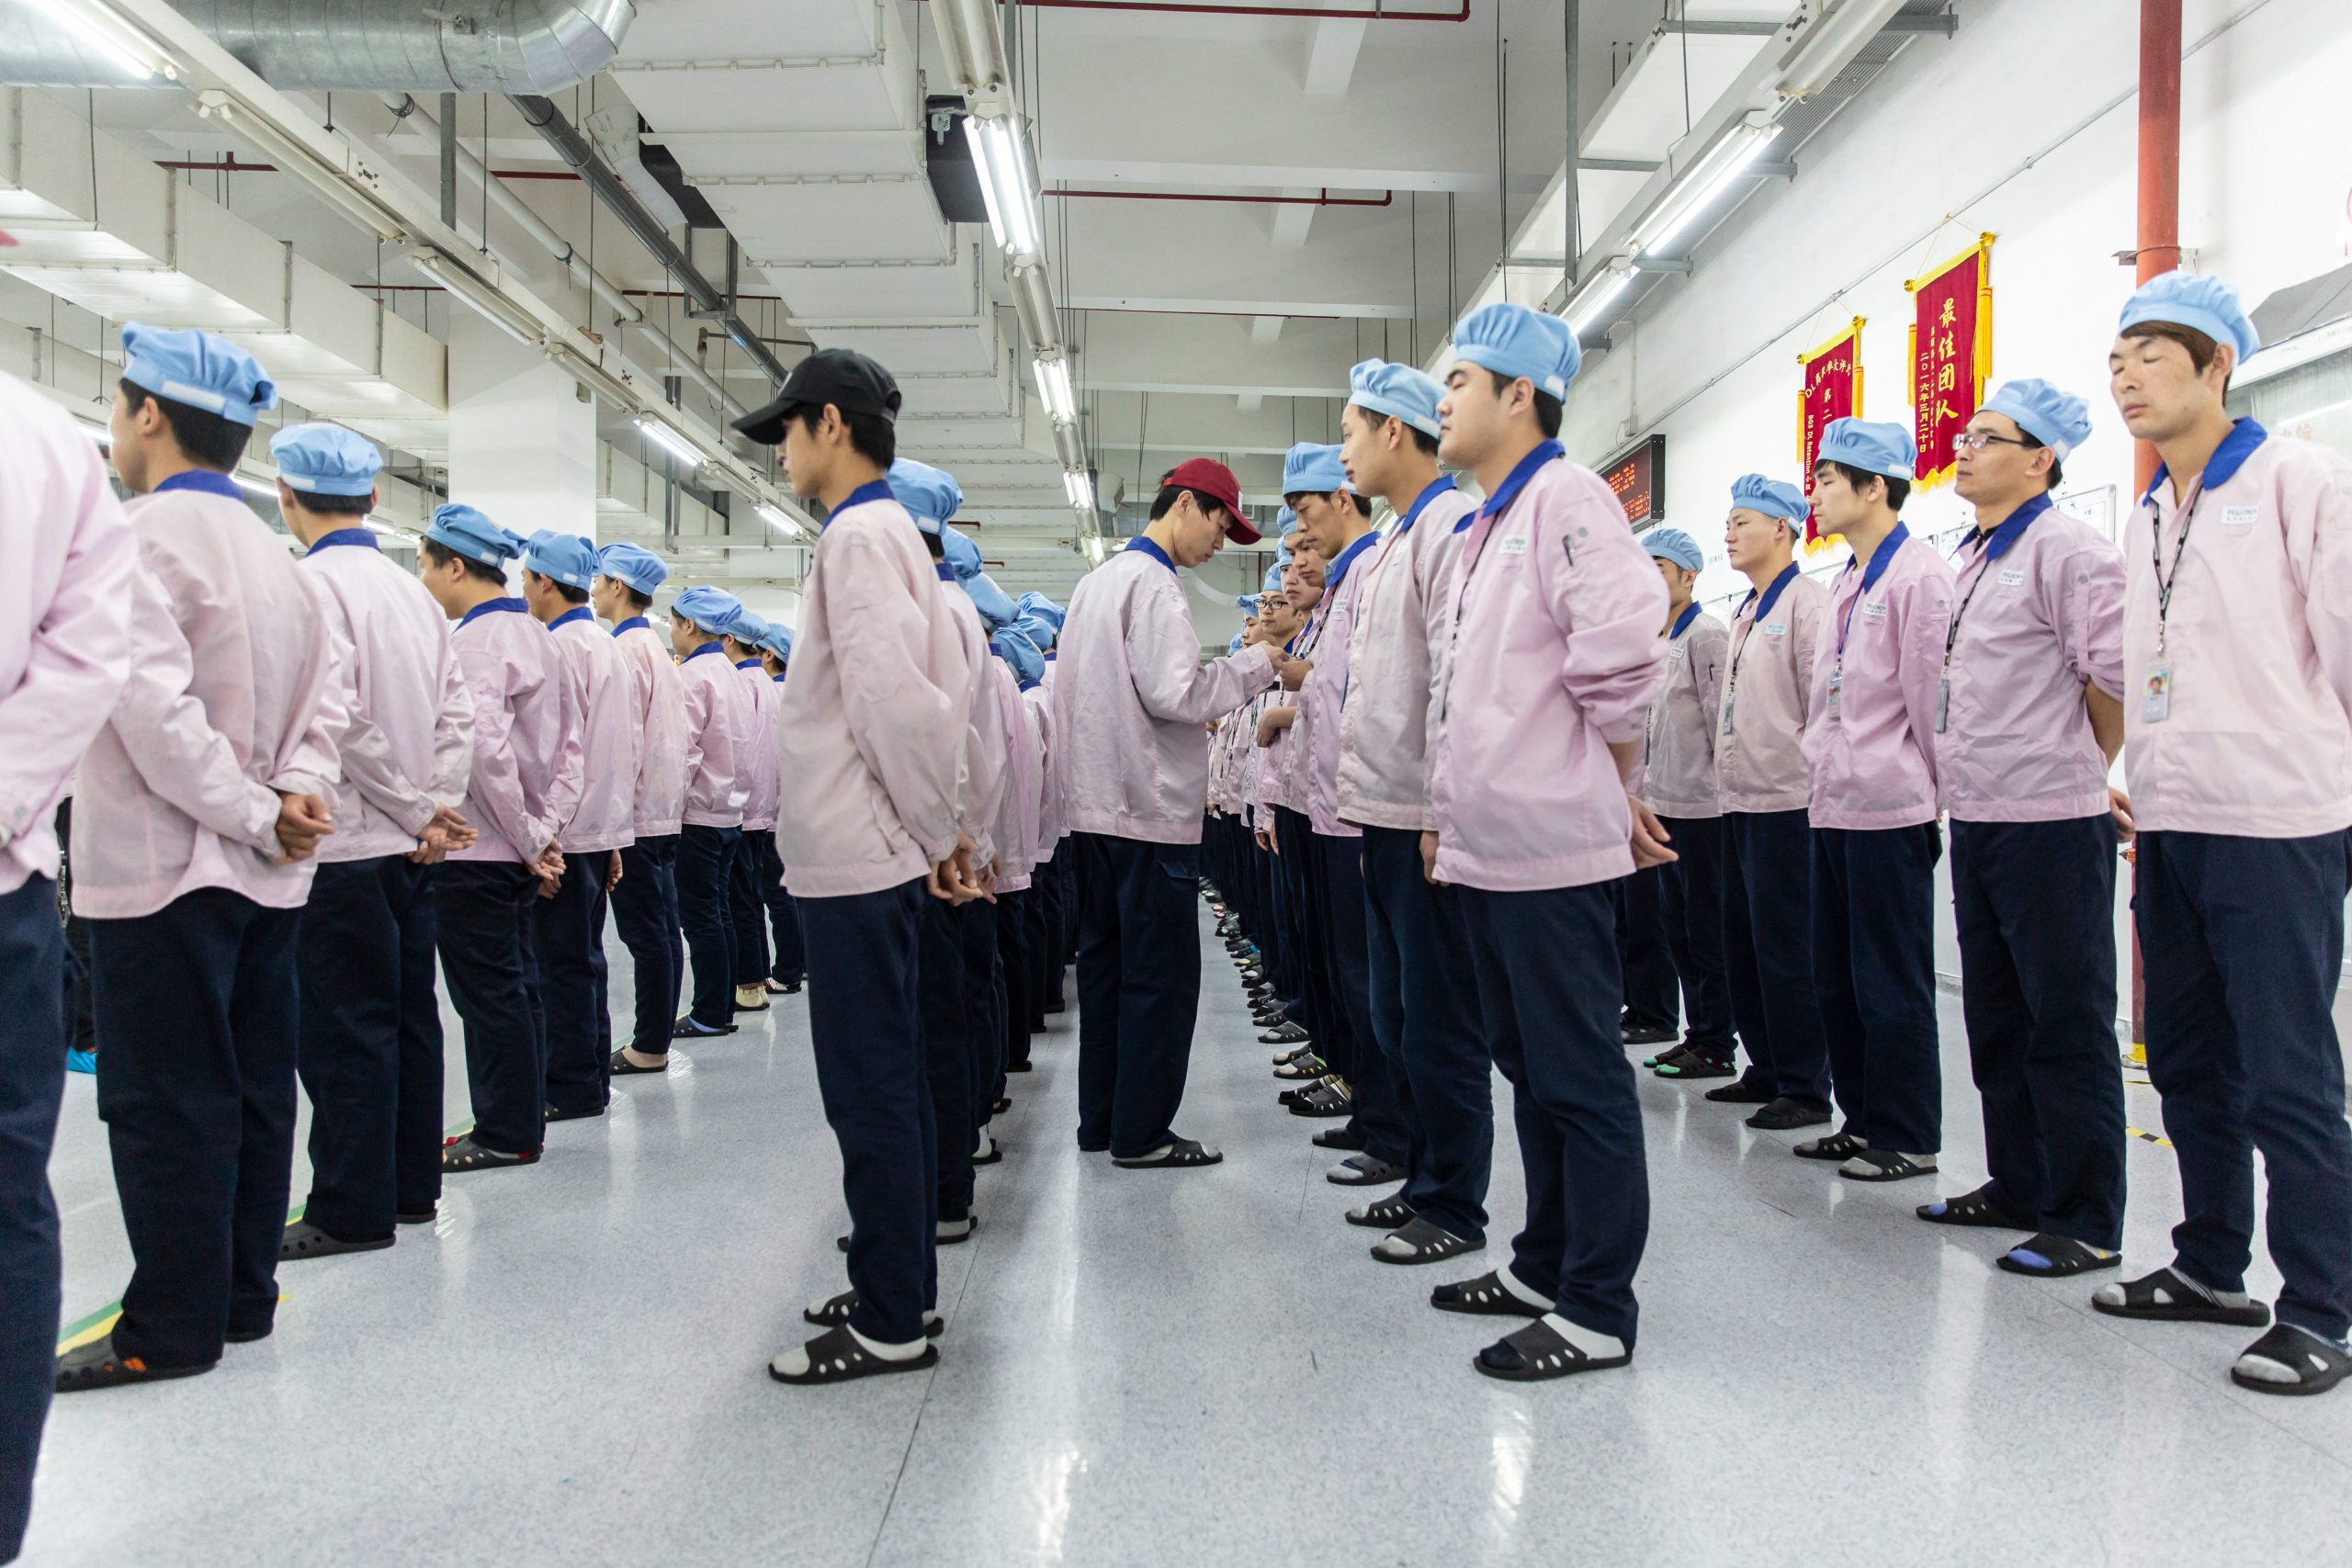 Employees line up for row call before their shift starts at a Pegatron Corp. factory in Shanghai, China, on Friday, April 15, 2016. This is the realm in which the world's most profitable smartphones are made, part of Apple Inc.'s closely guarded supply chain.